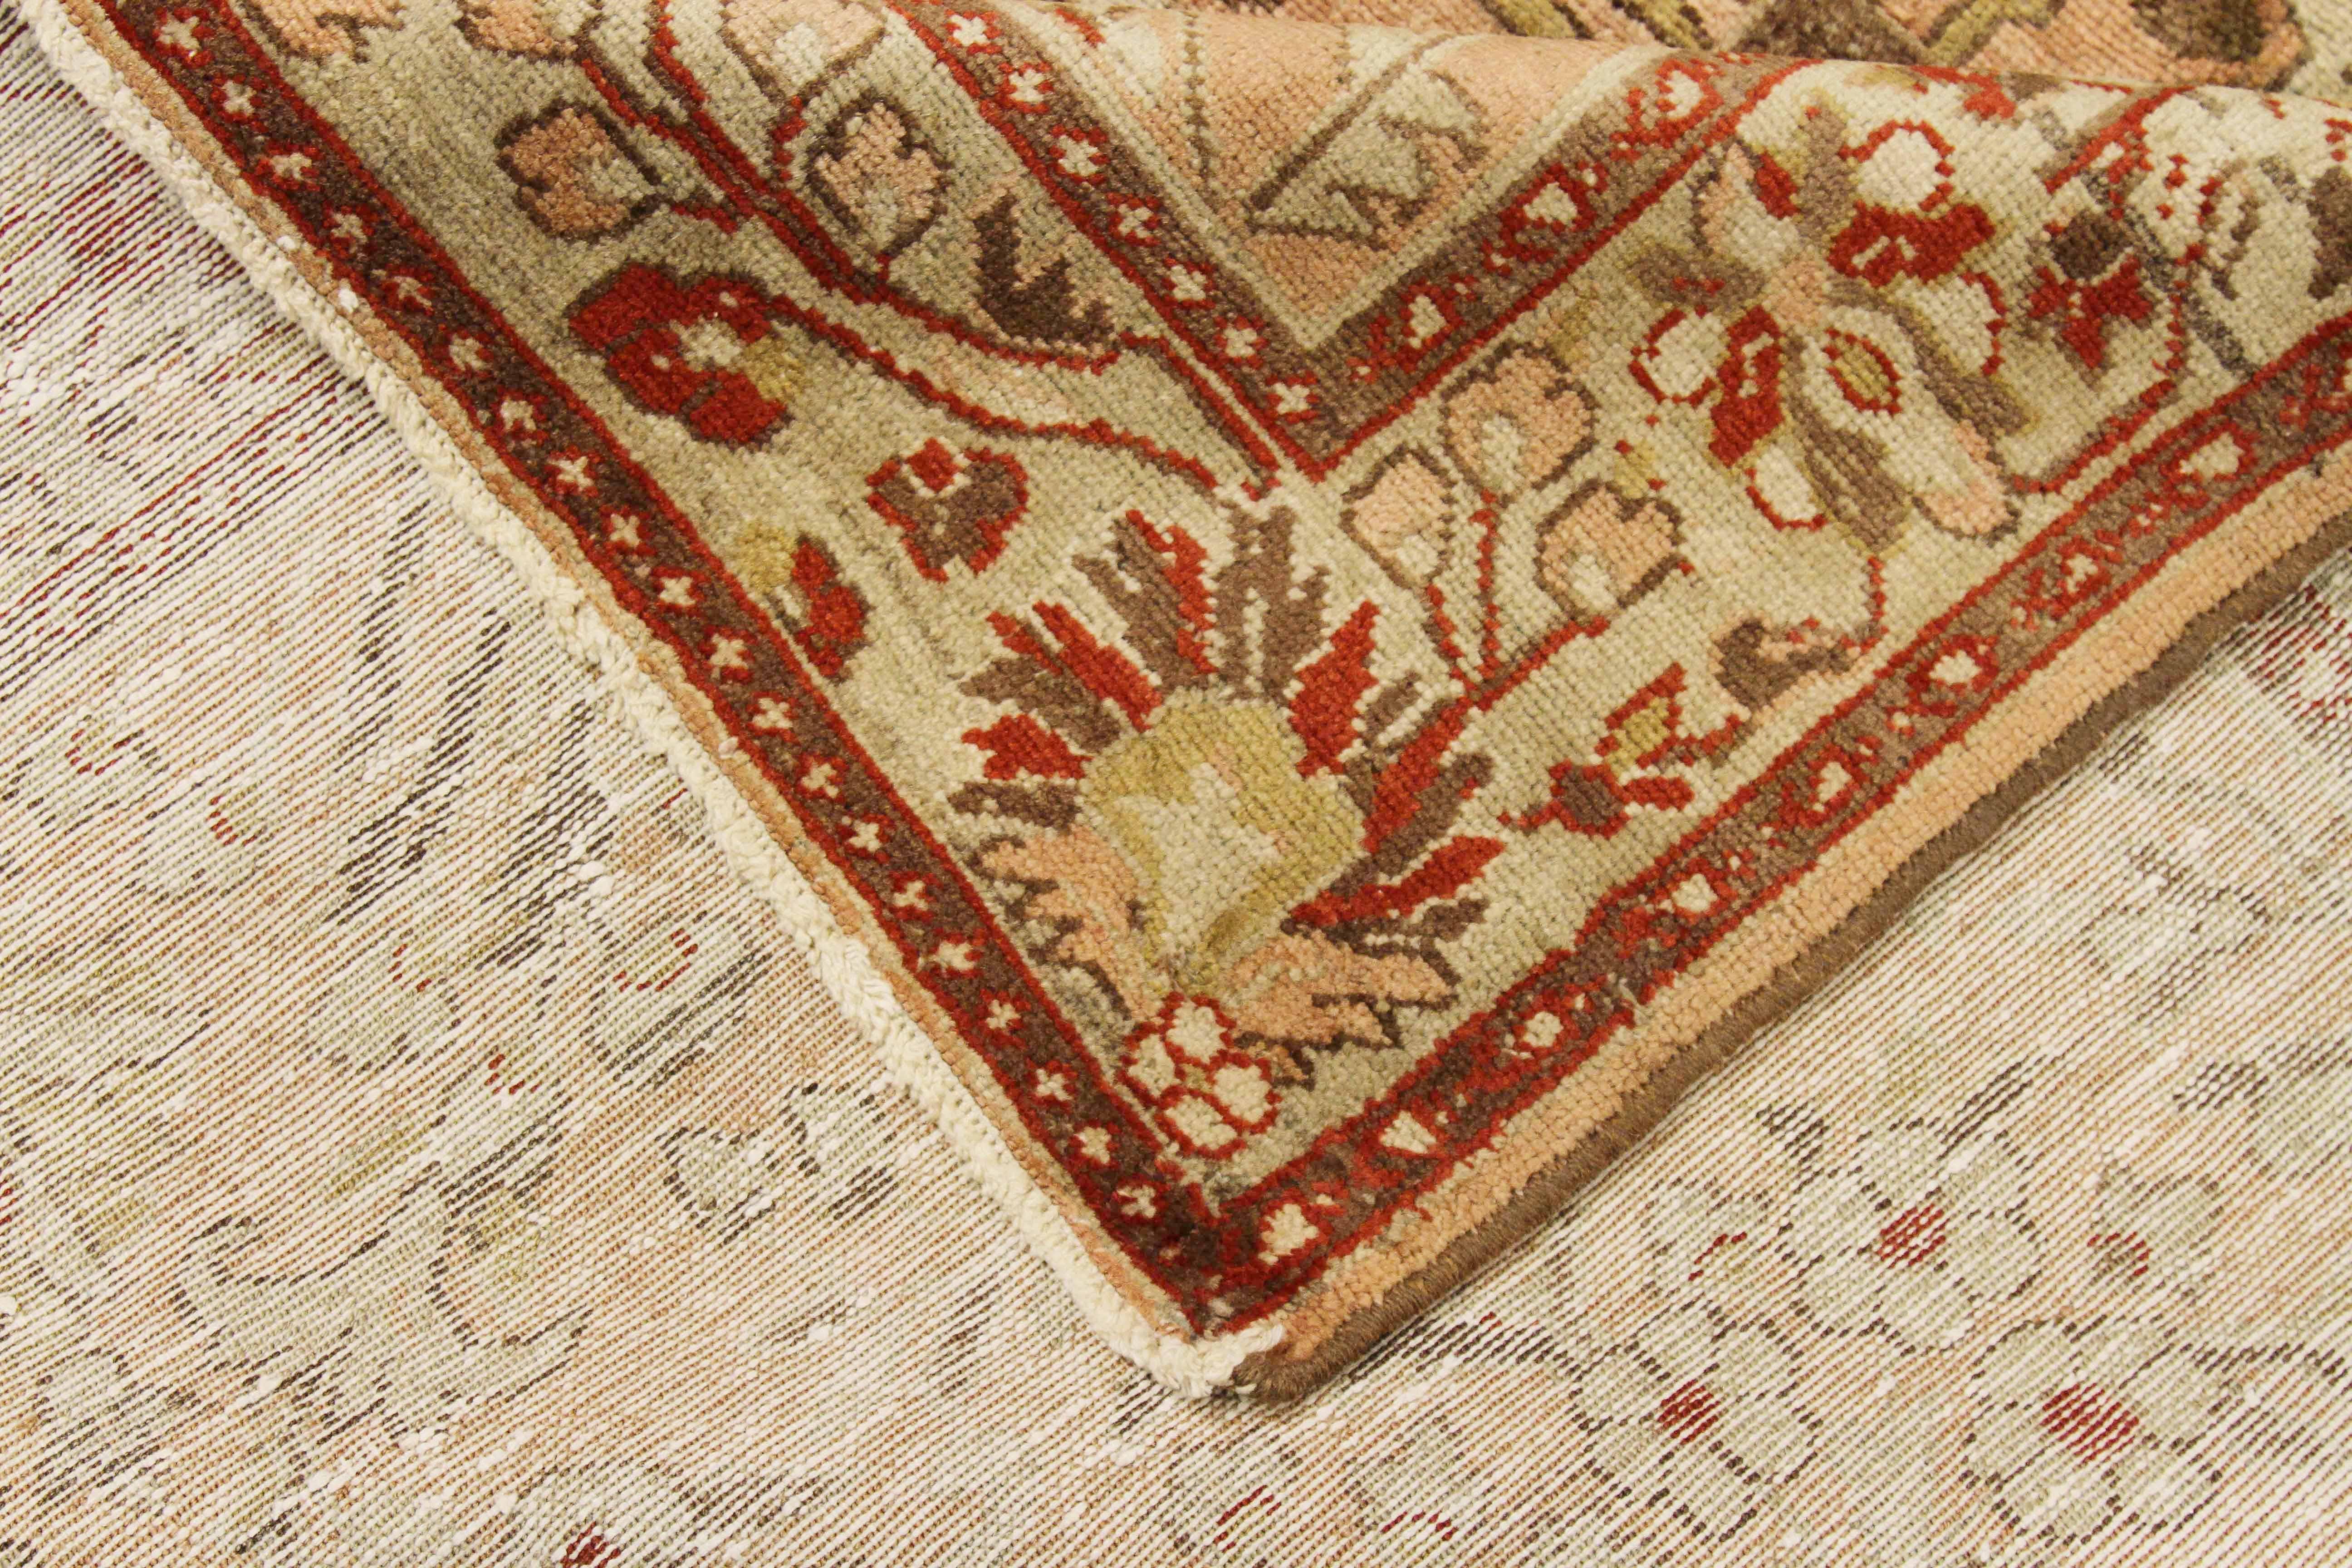 Hand-Woven Antique Persian Malayer Rug with Ivory and Brown Floral Details on Beige Field For Sale